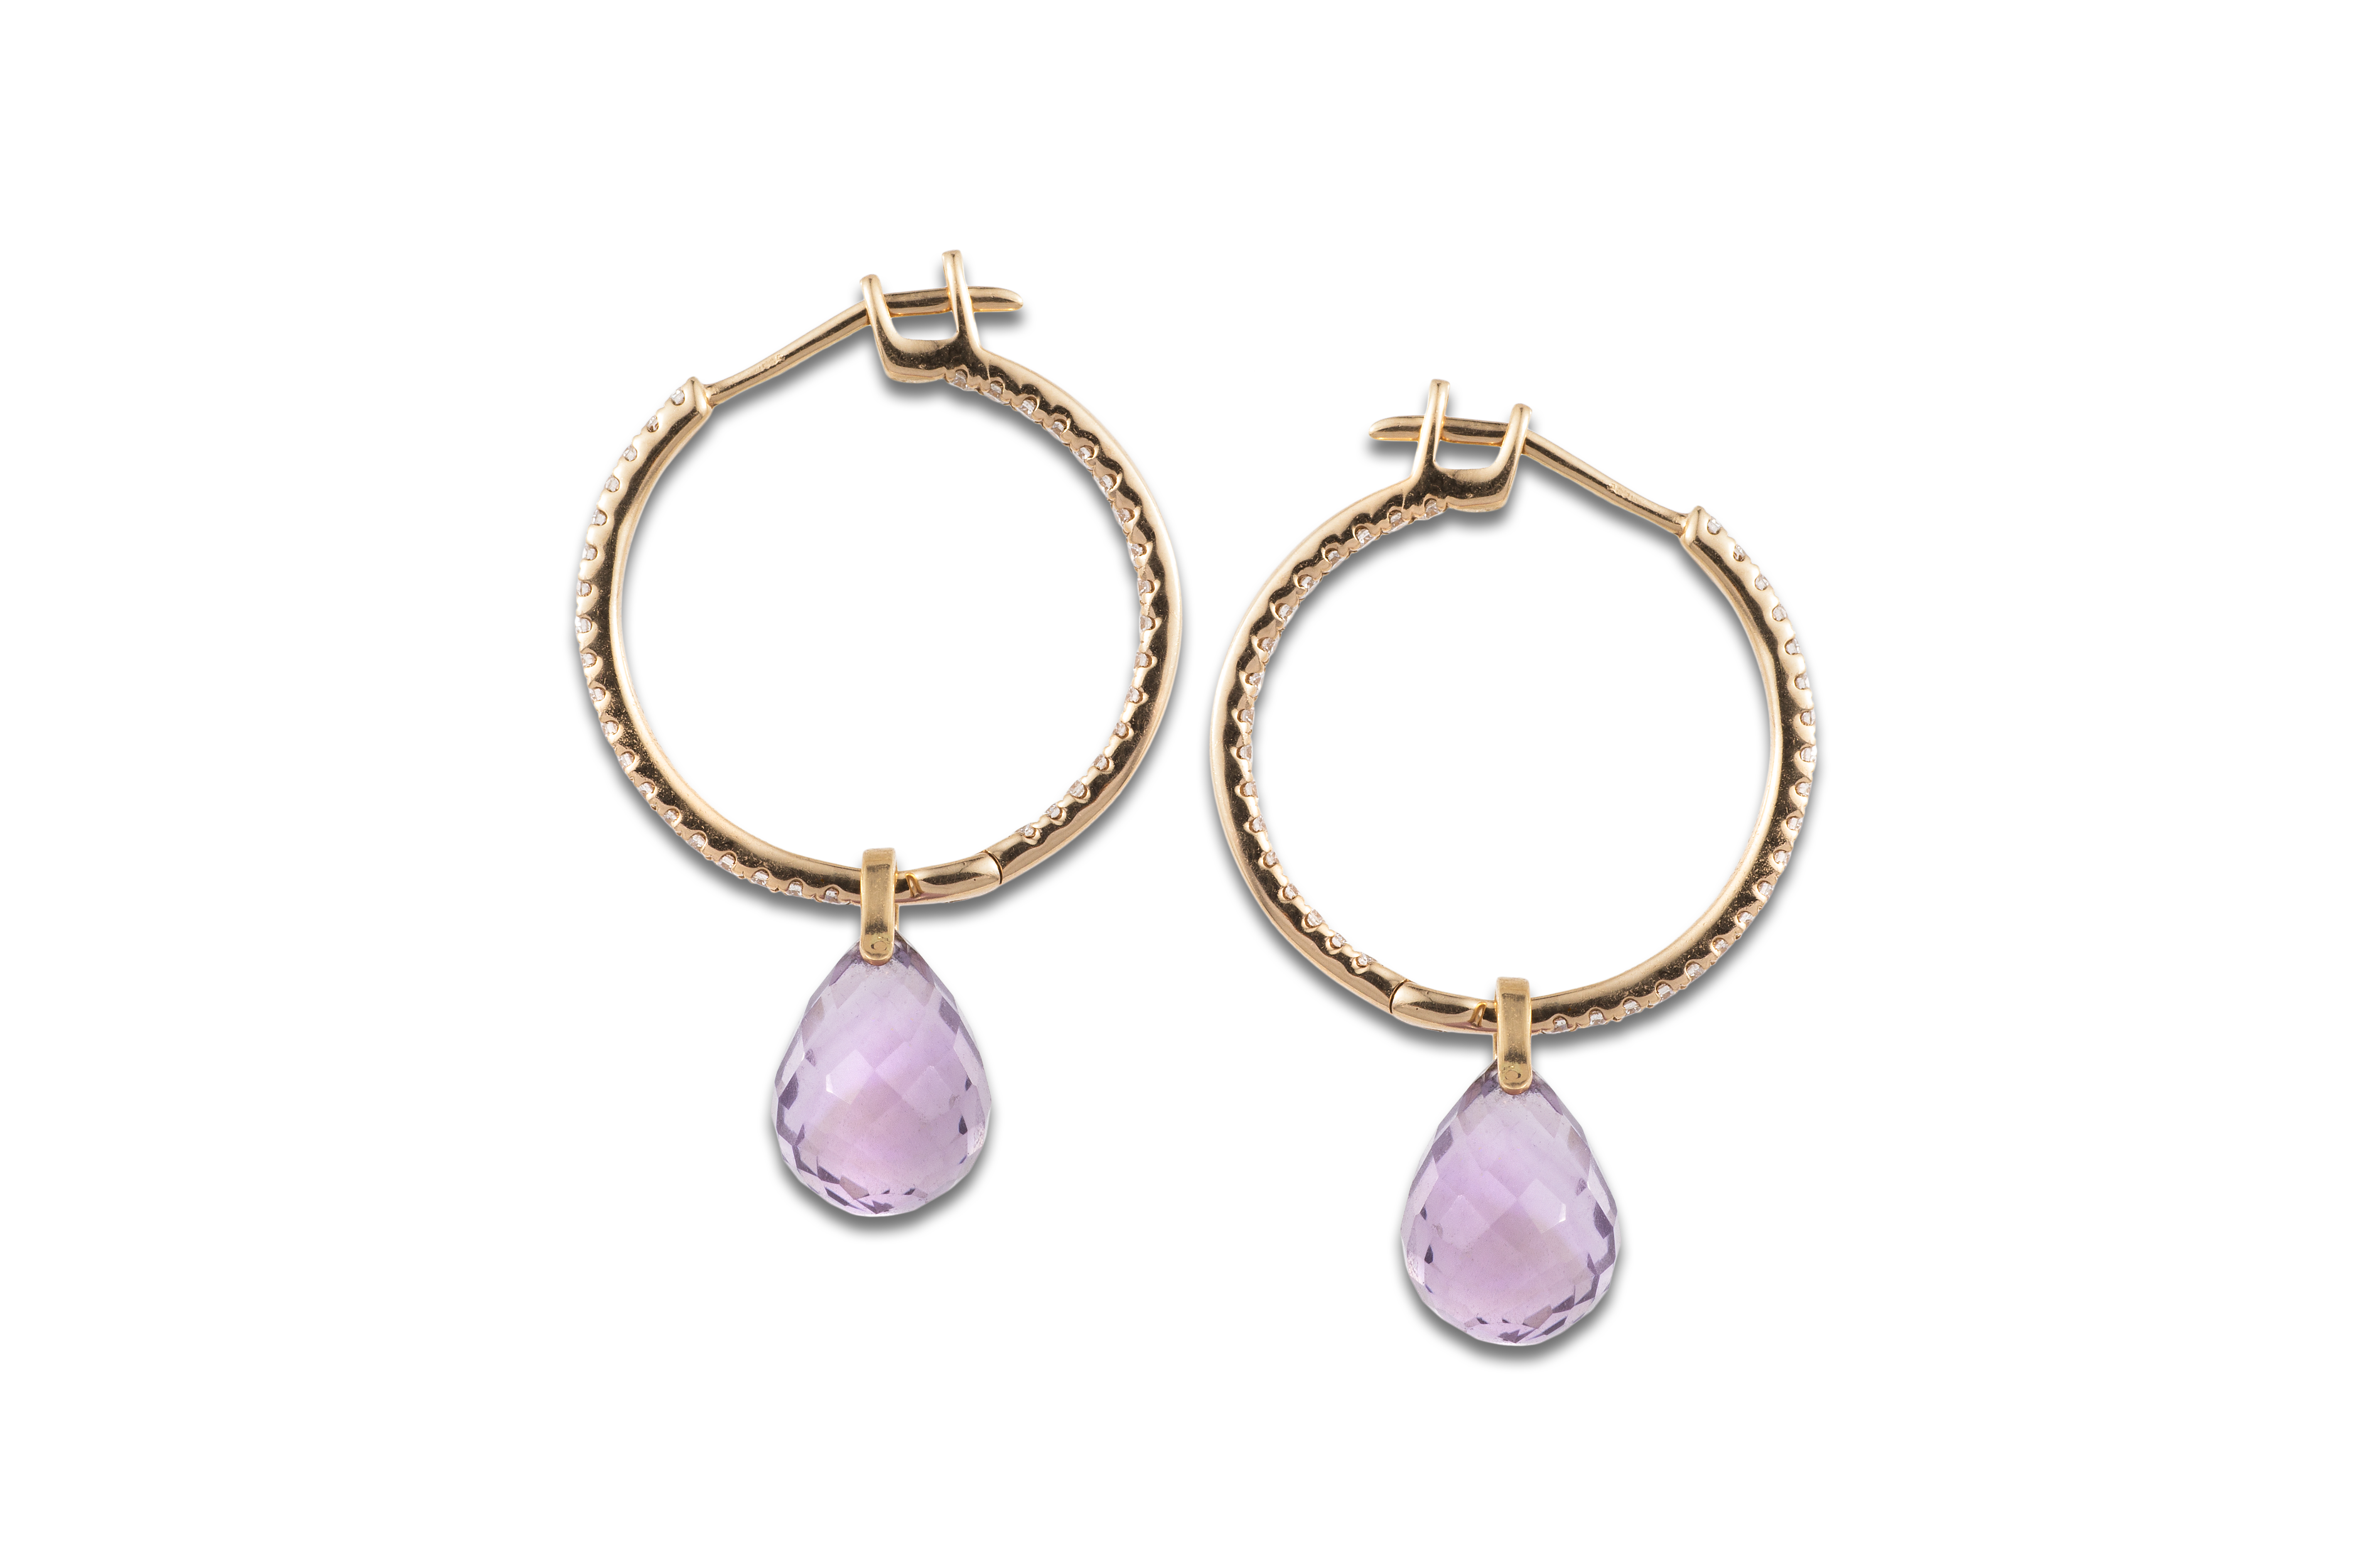 Creole earrings in rose gold